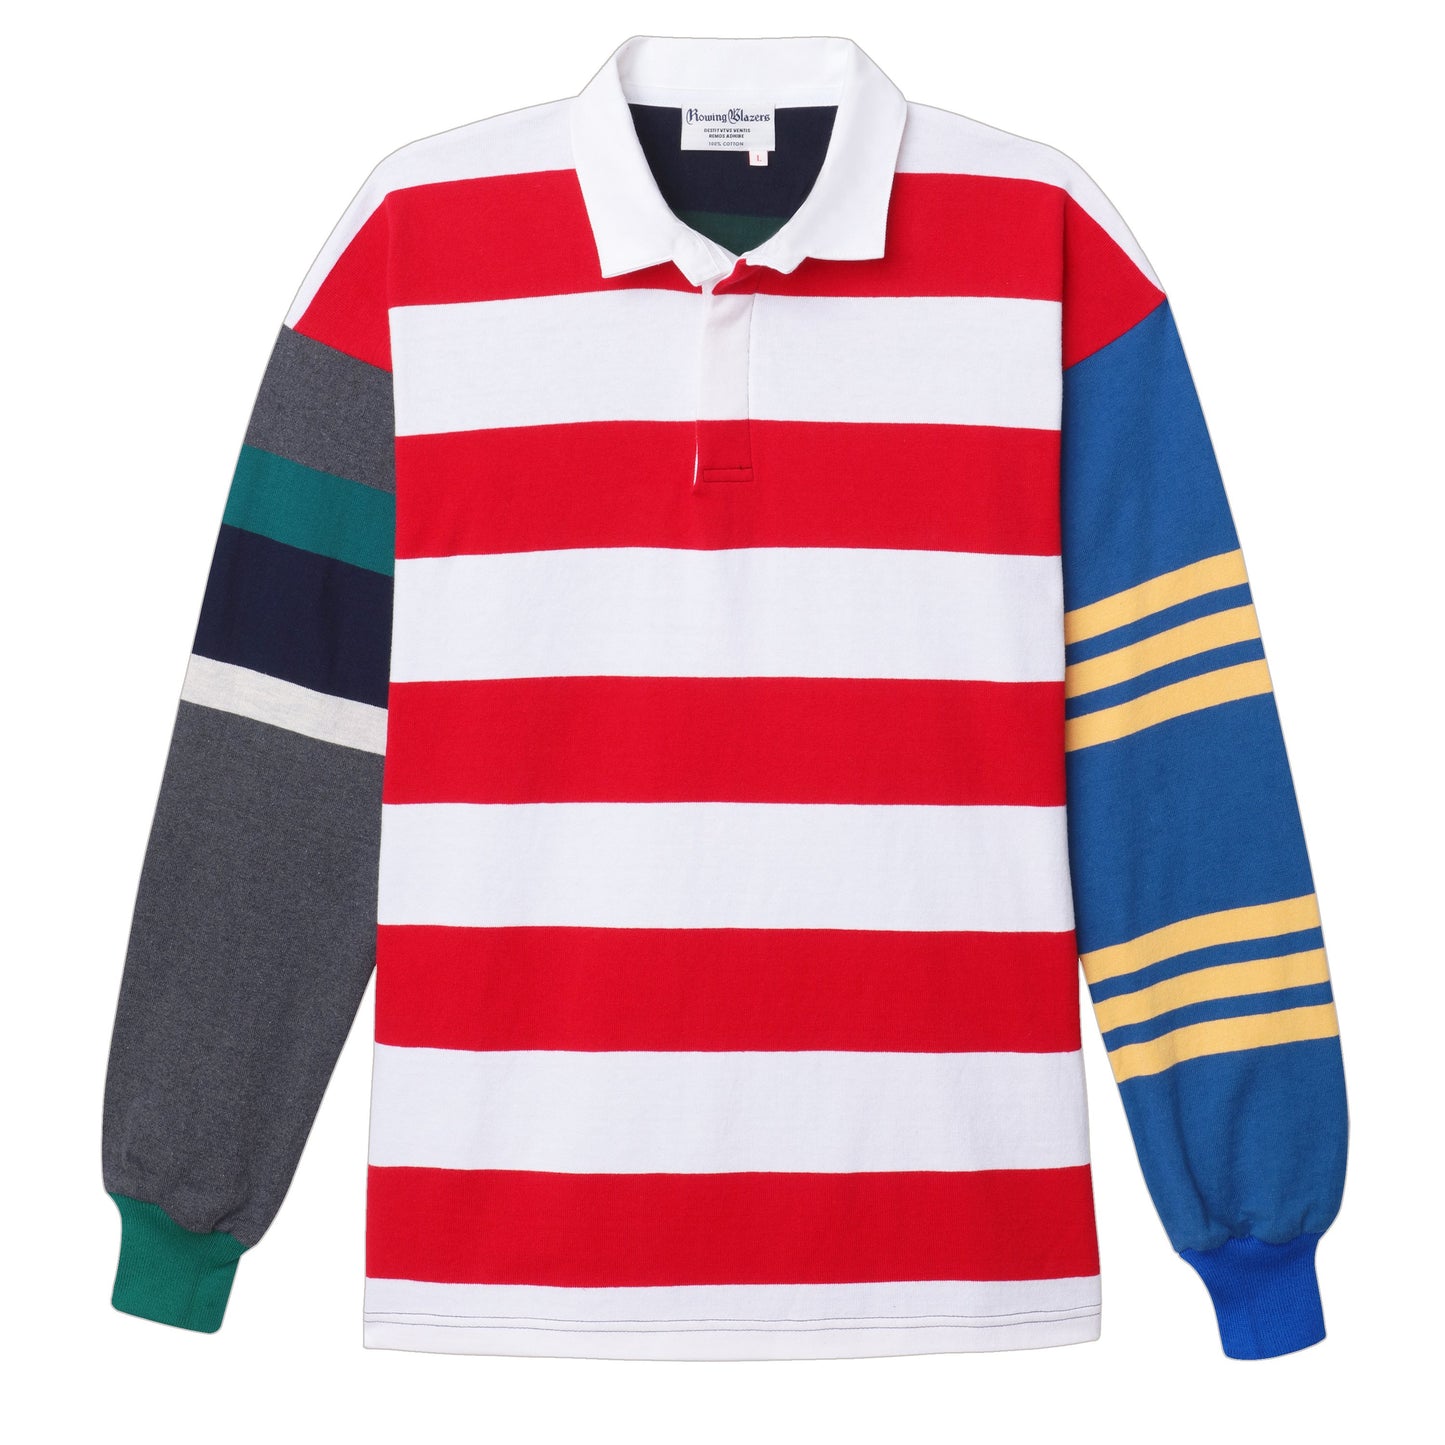 One-of-one striped rugby shirt made from leftover fabric. Red and white body, mismatched sleeves.  Each is unique.